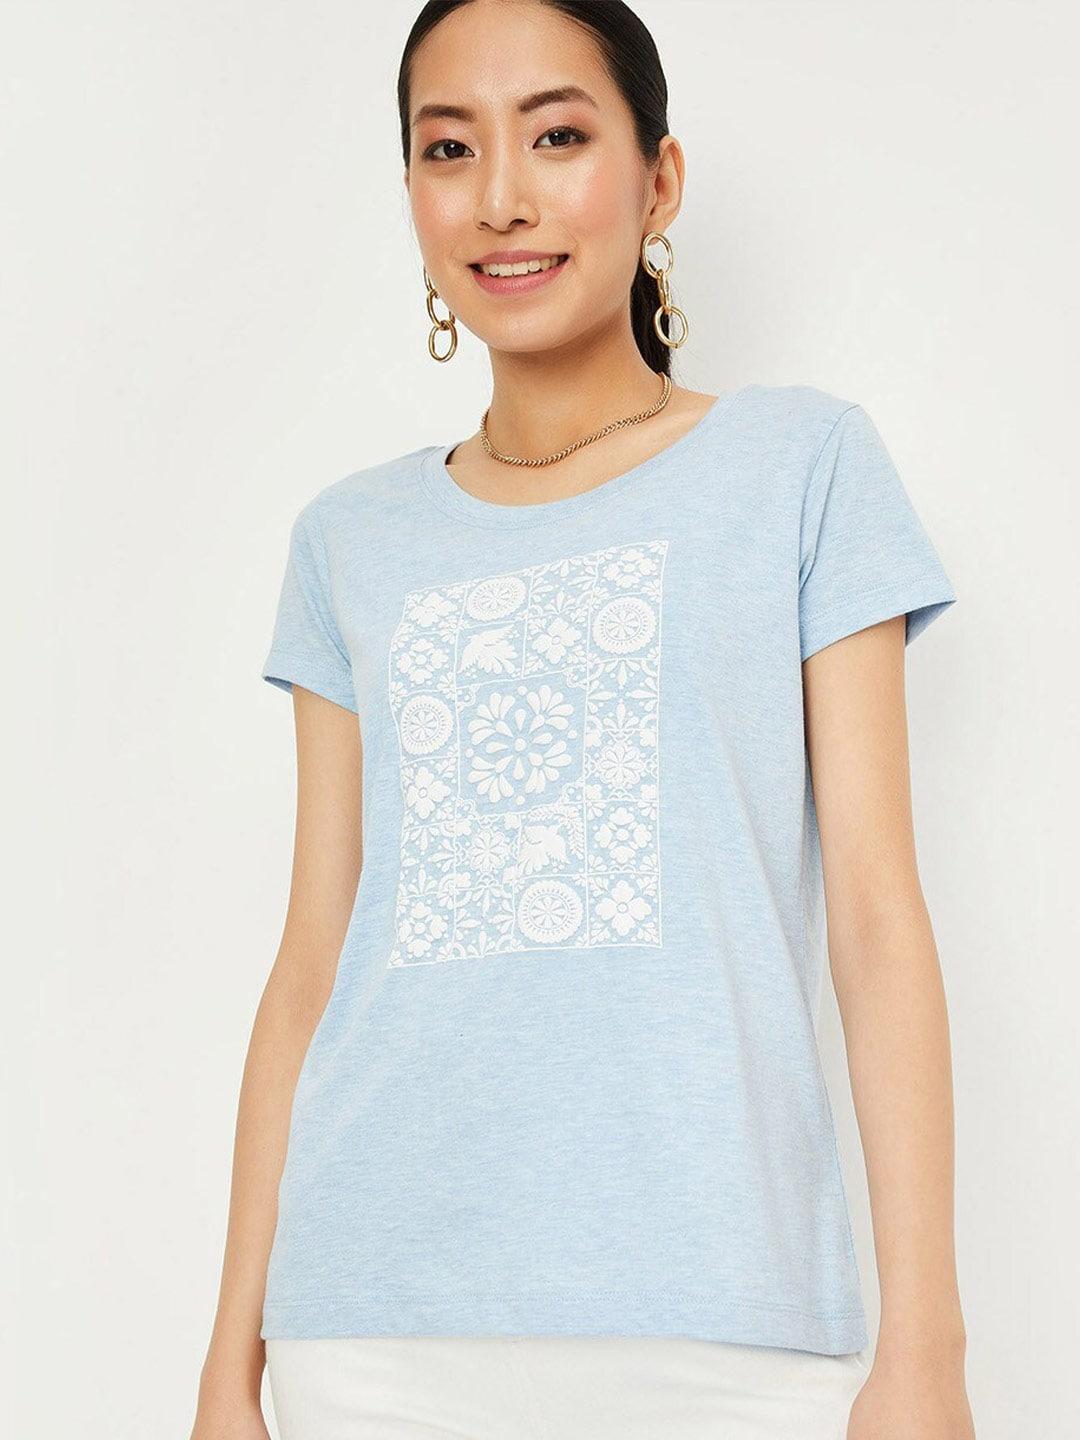 max graphic printed pure cotton t-shirt